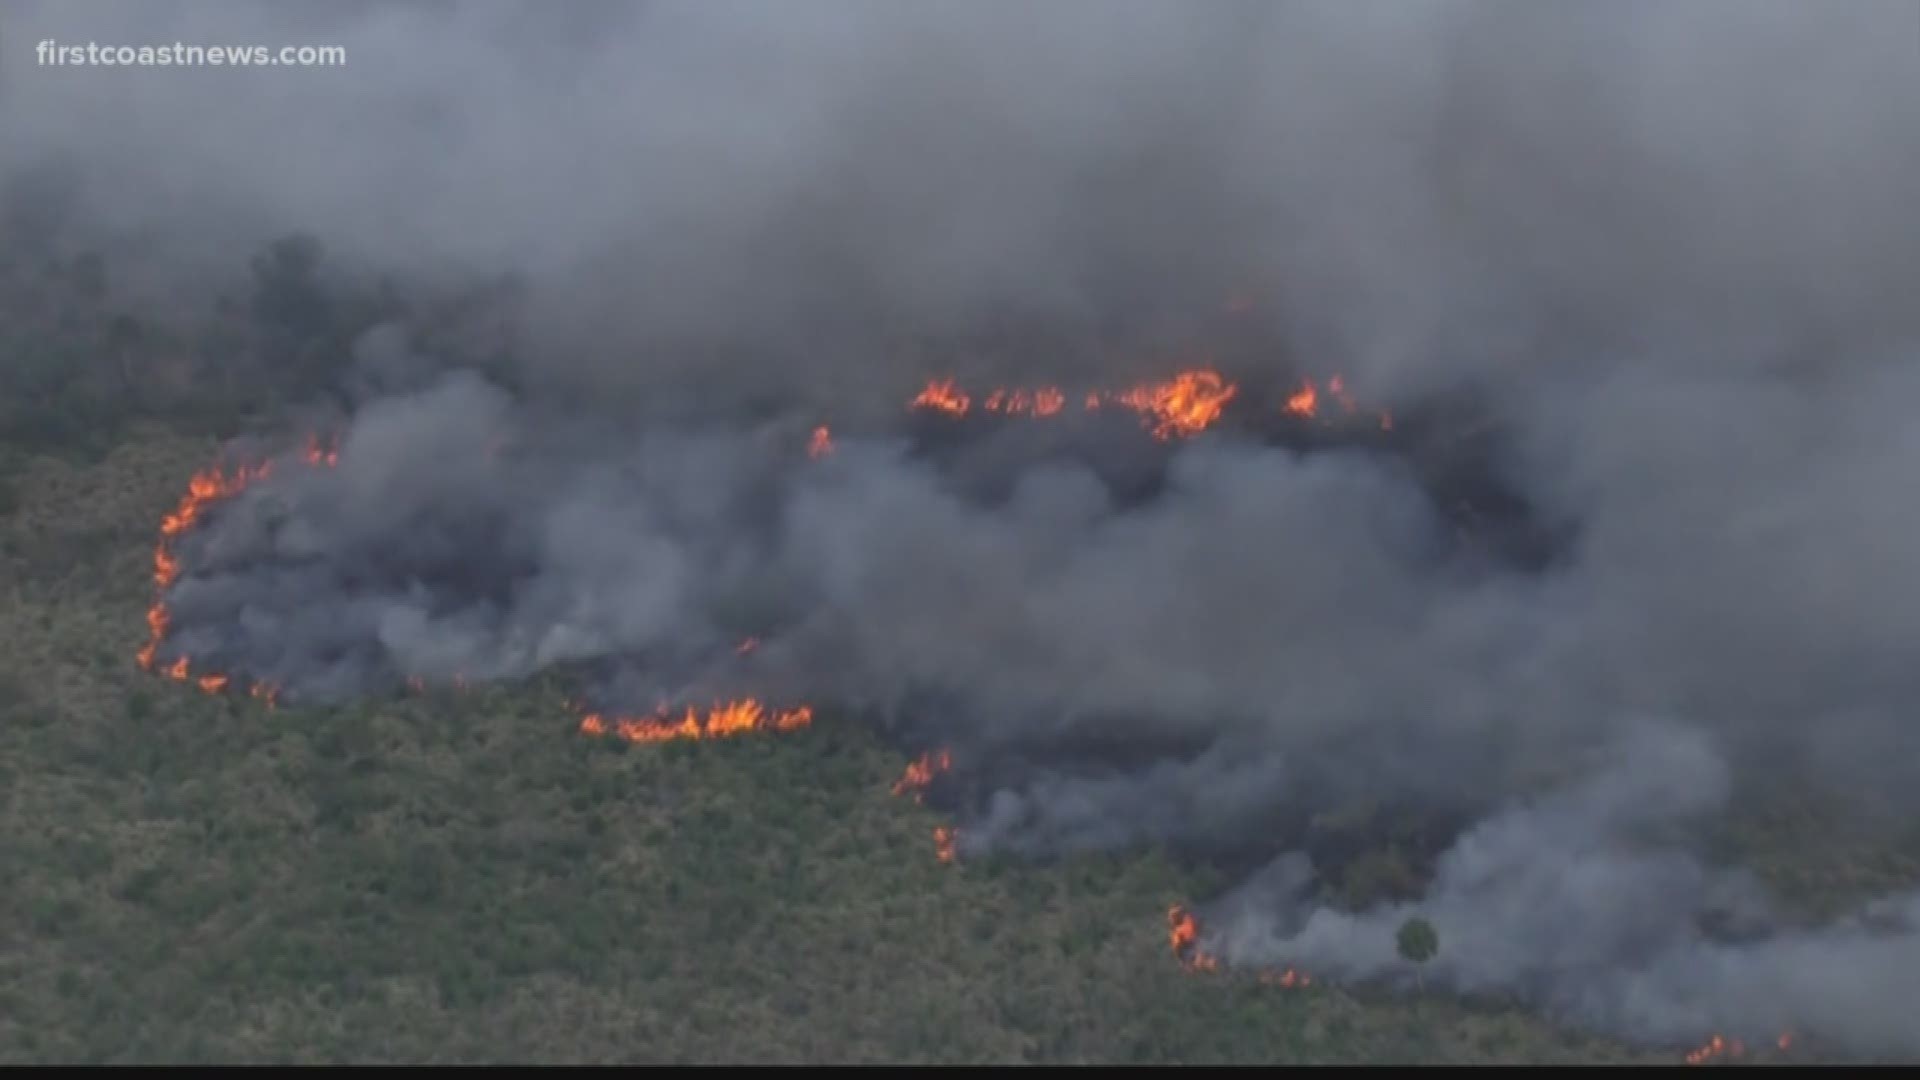 Fire crews are battling a multi-acre brush fire threatening several homes in Central Florida.